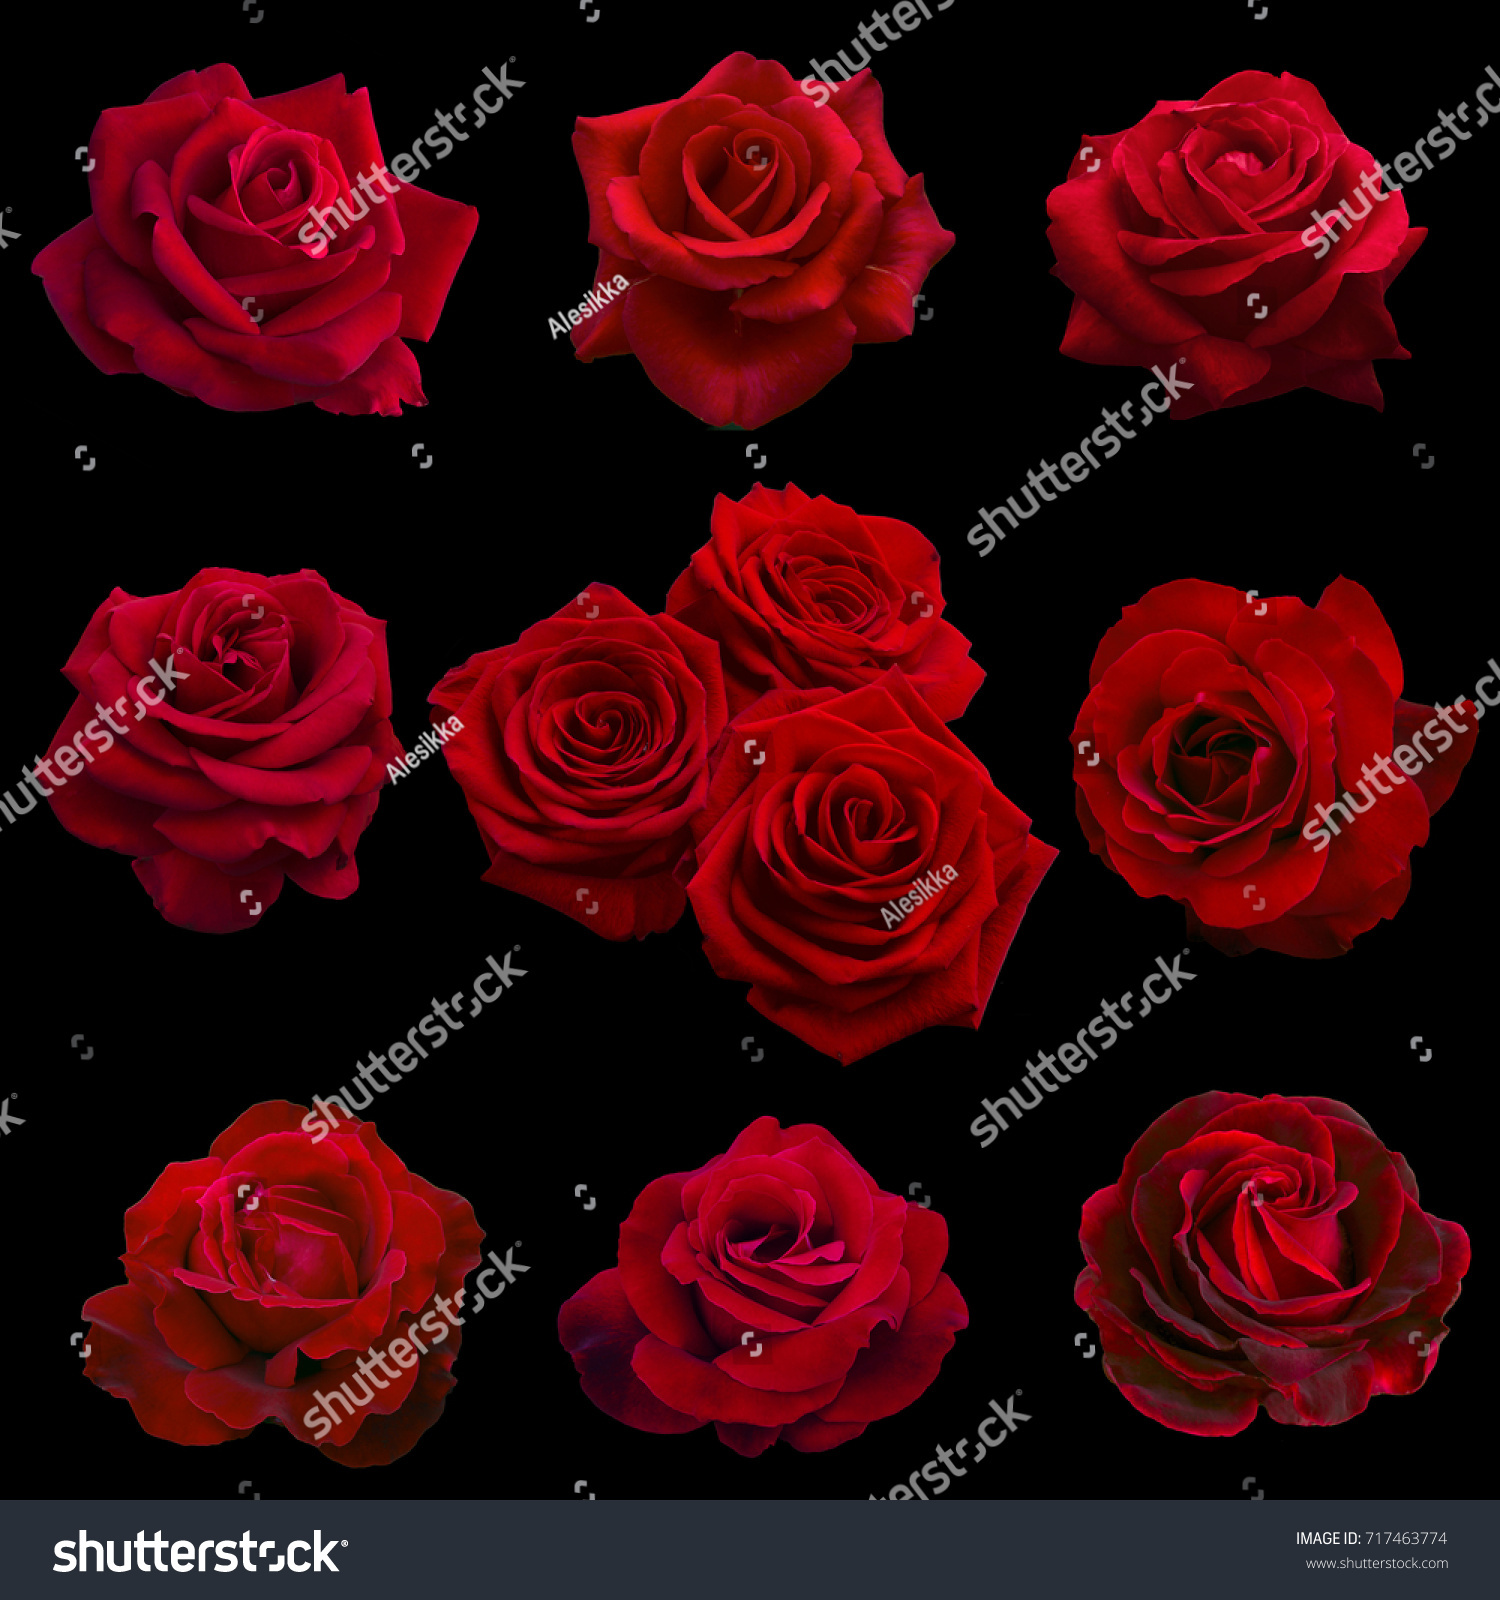 Collage Red Roses Isolated On Black Stock Photo (Royalty Free ...